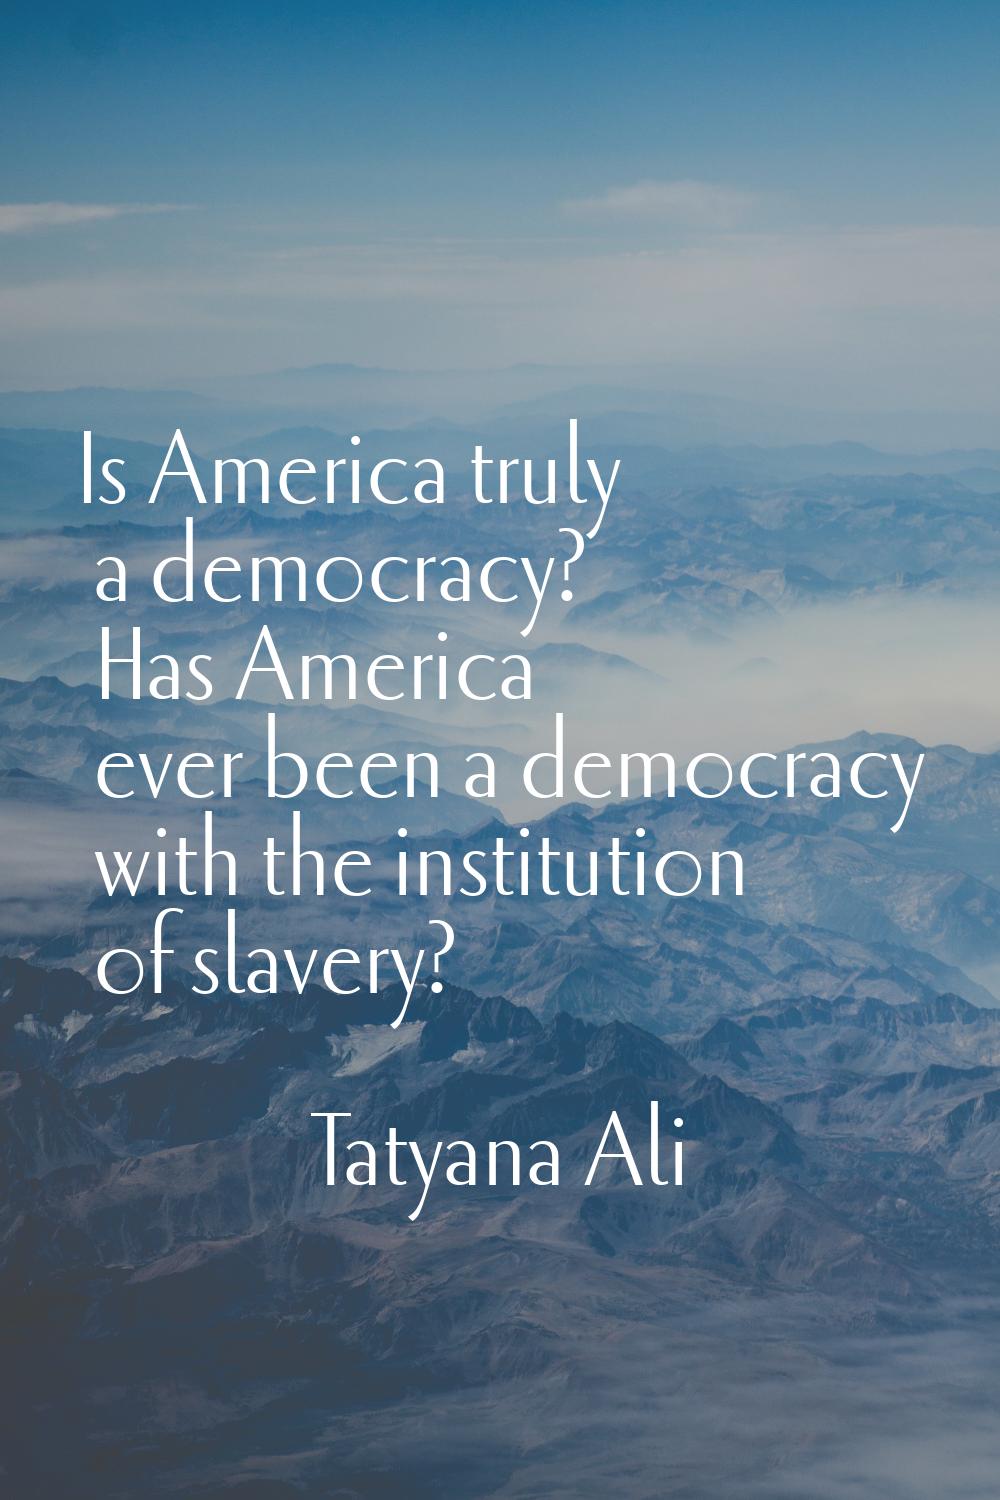 Is America truly a democracy? Has America ever been a democracy with the institution of slavery?